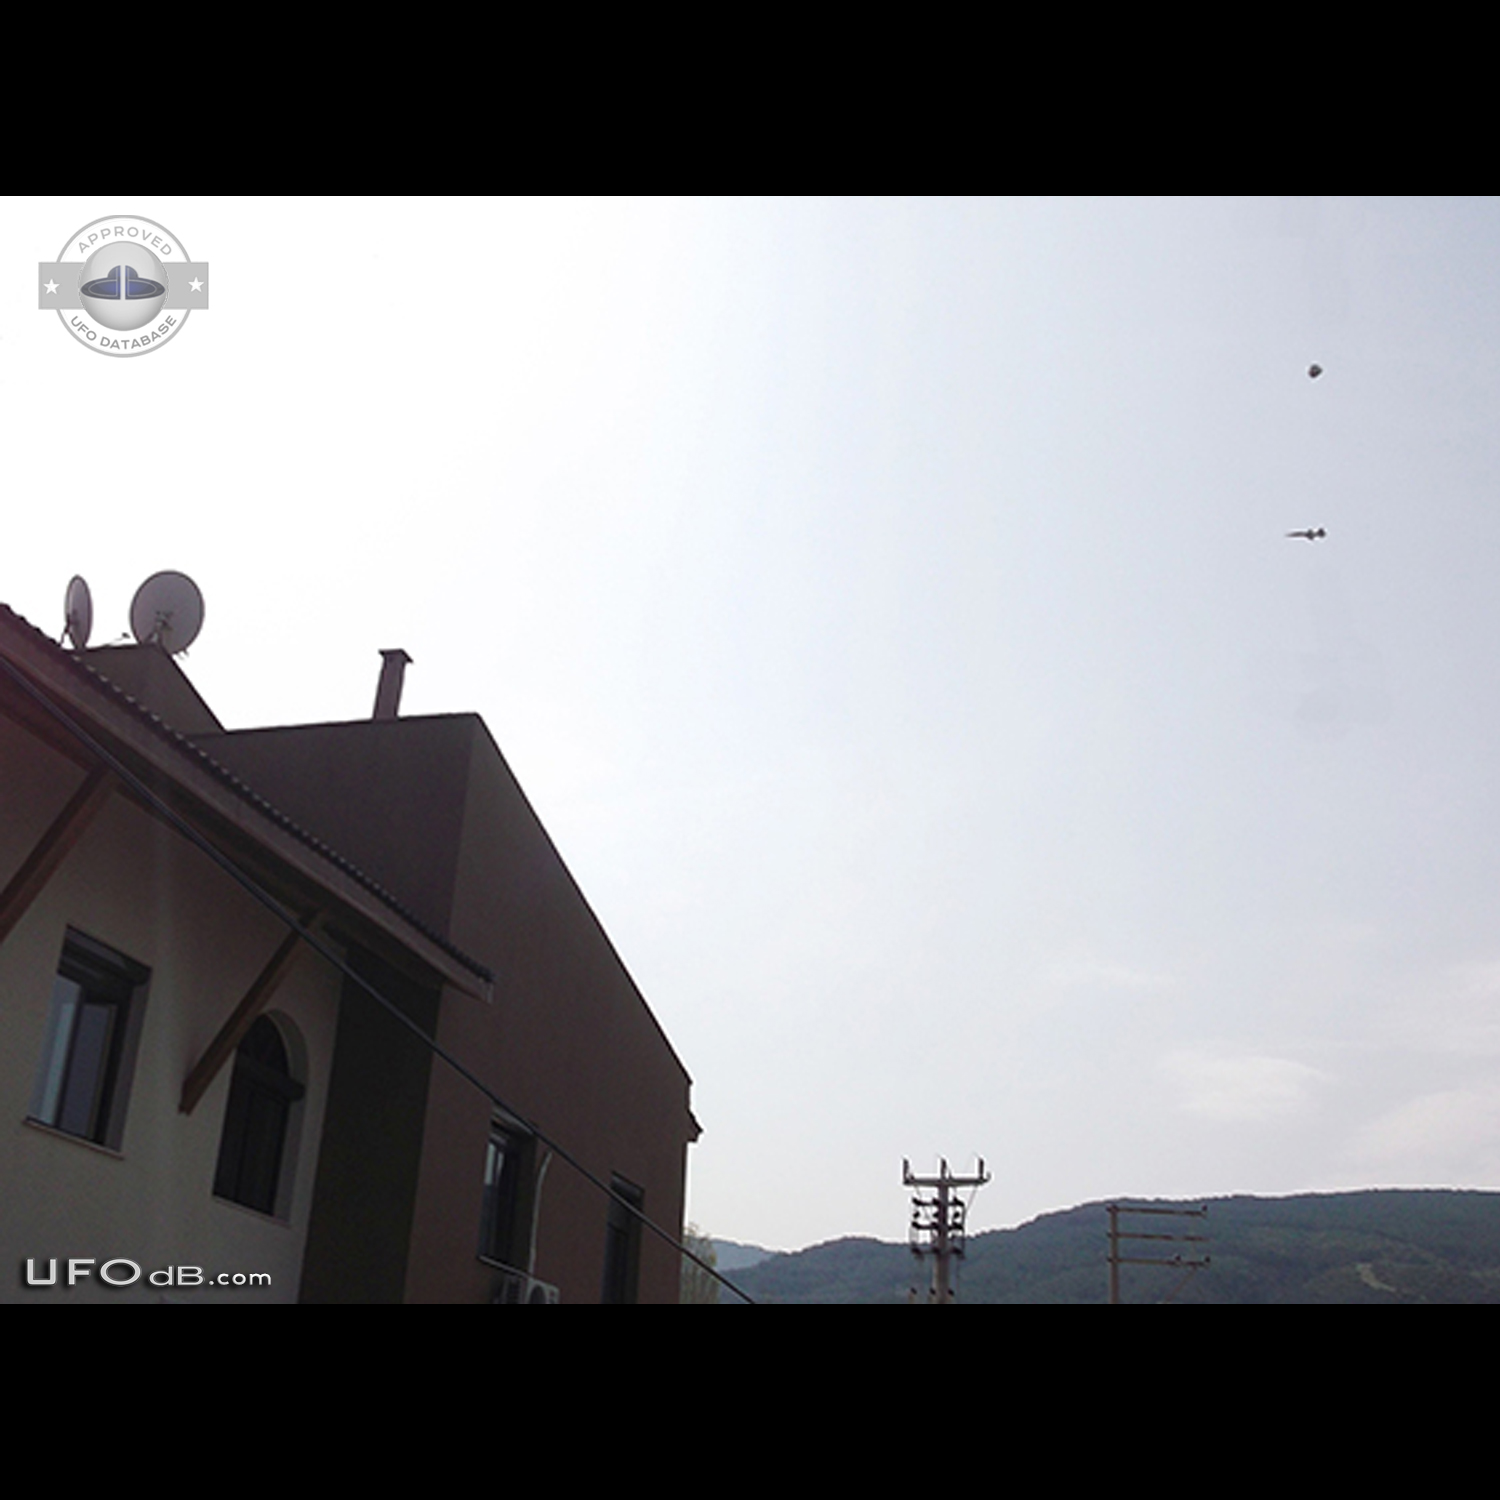 F-5 fighter aircraft seen near UFO in Doganbey, Aegean in Turkey 20144 UFO Picture #569-1